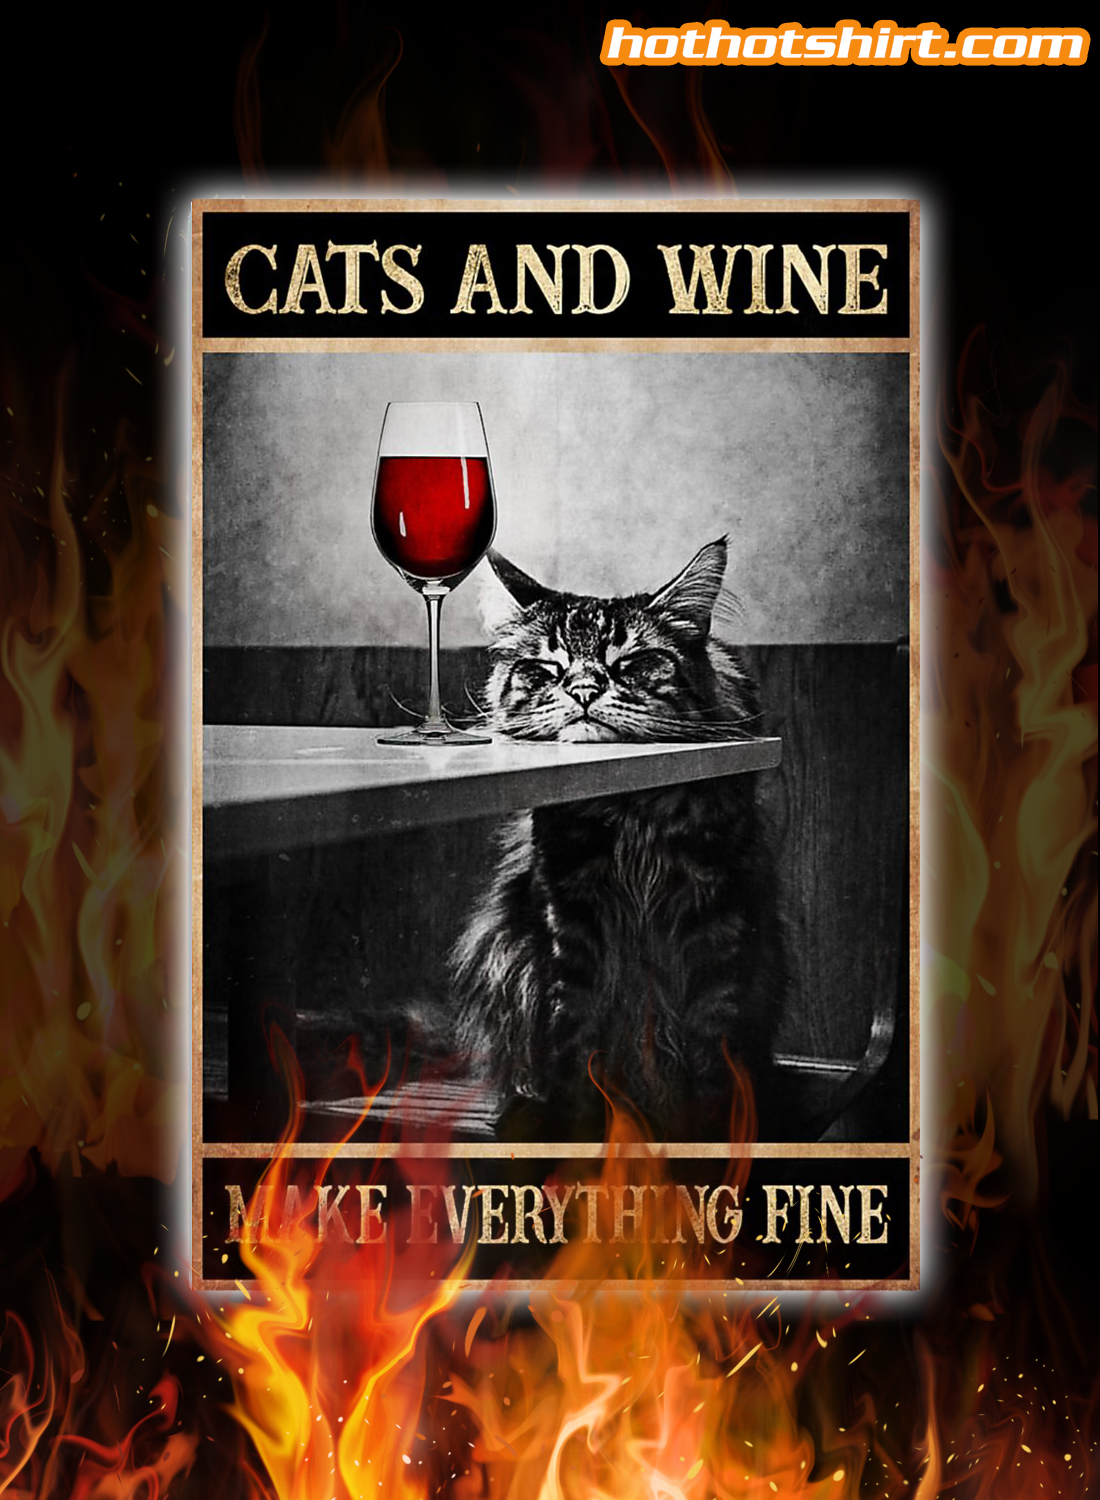 Cats and wine make everything fine poster